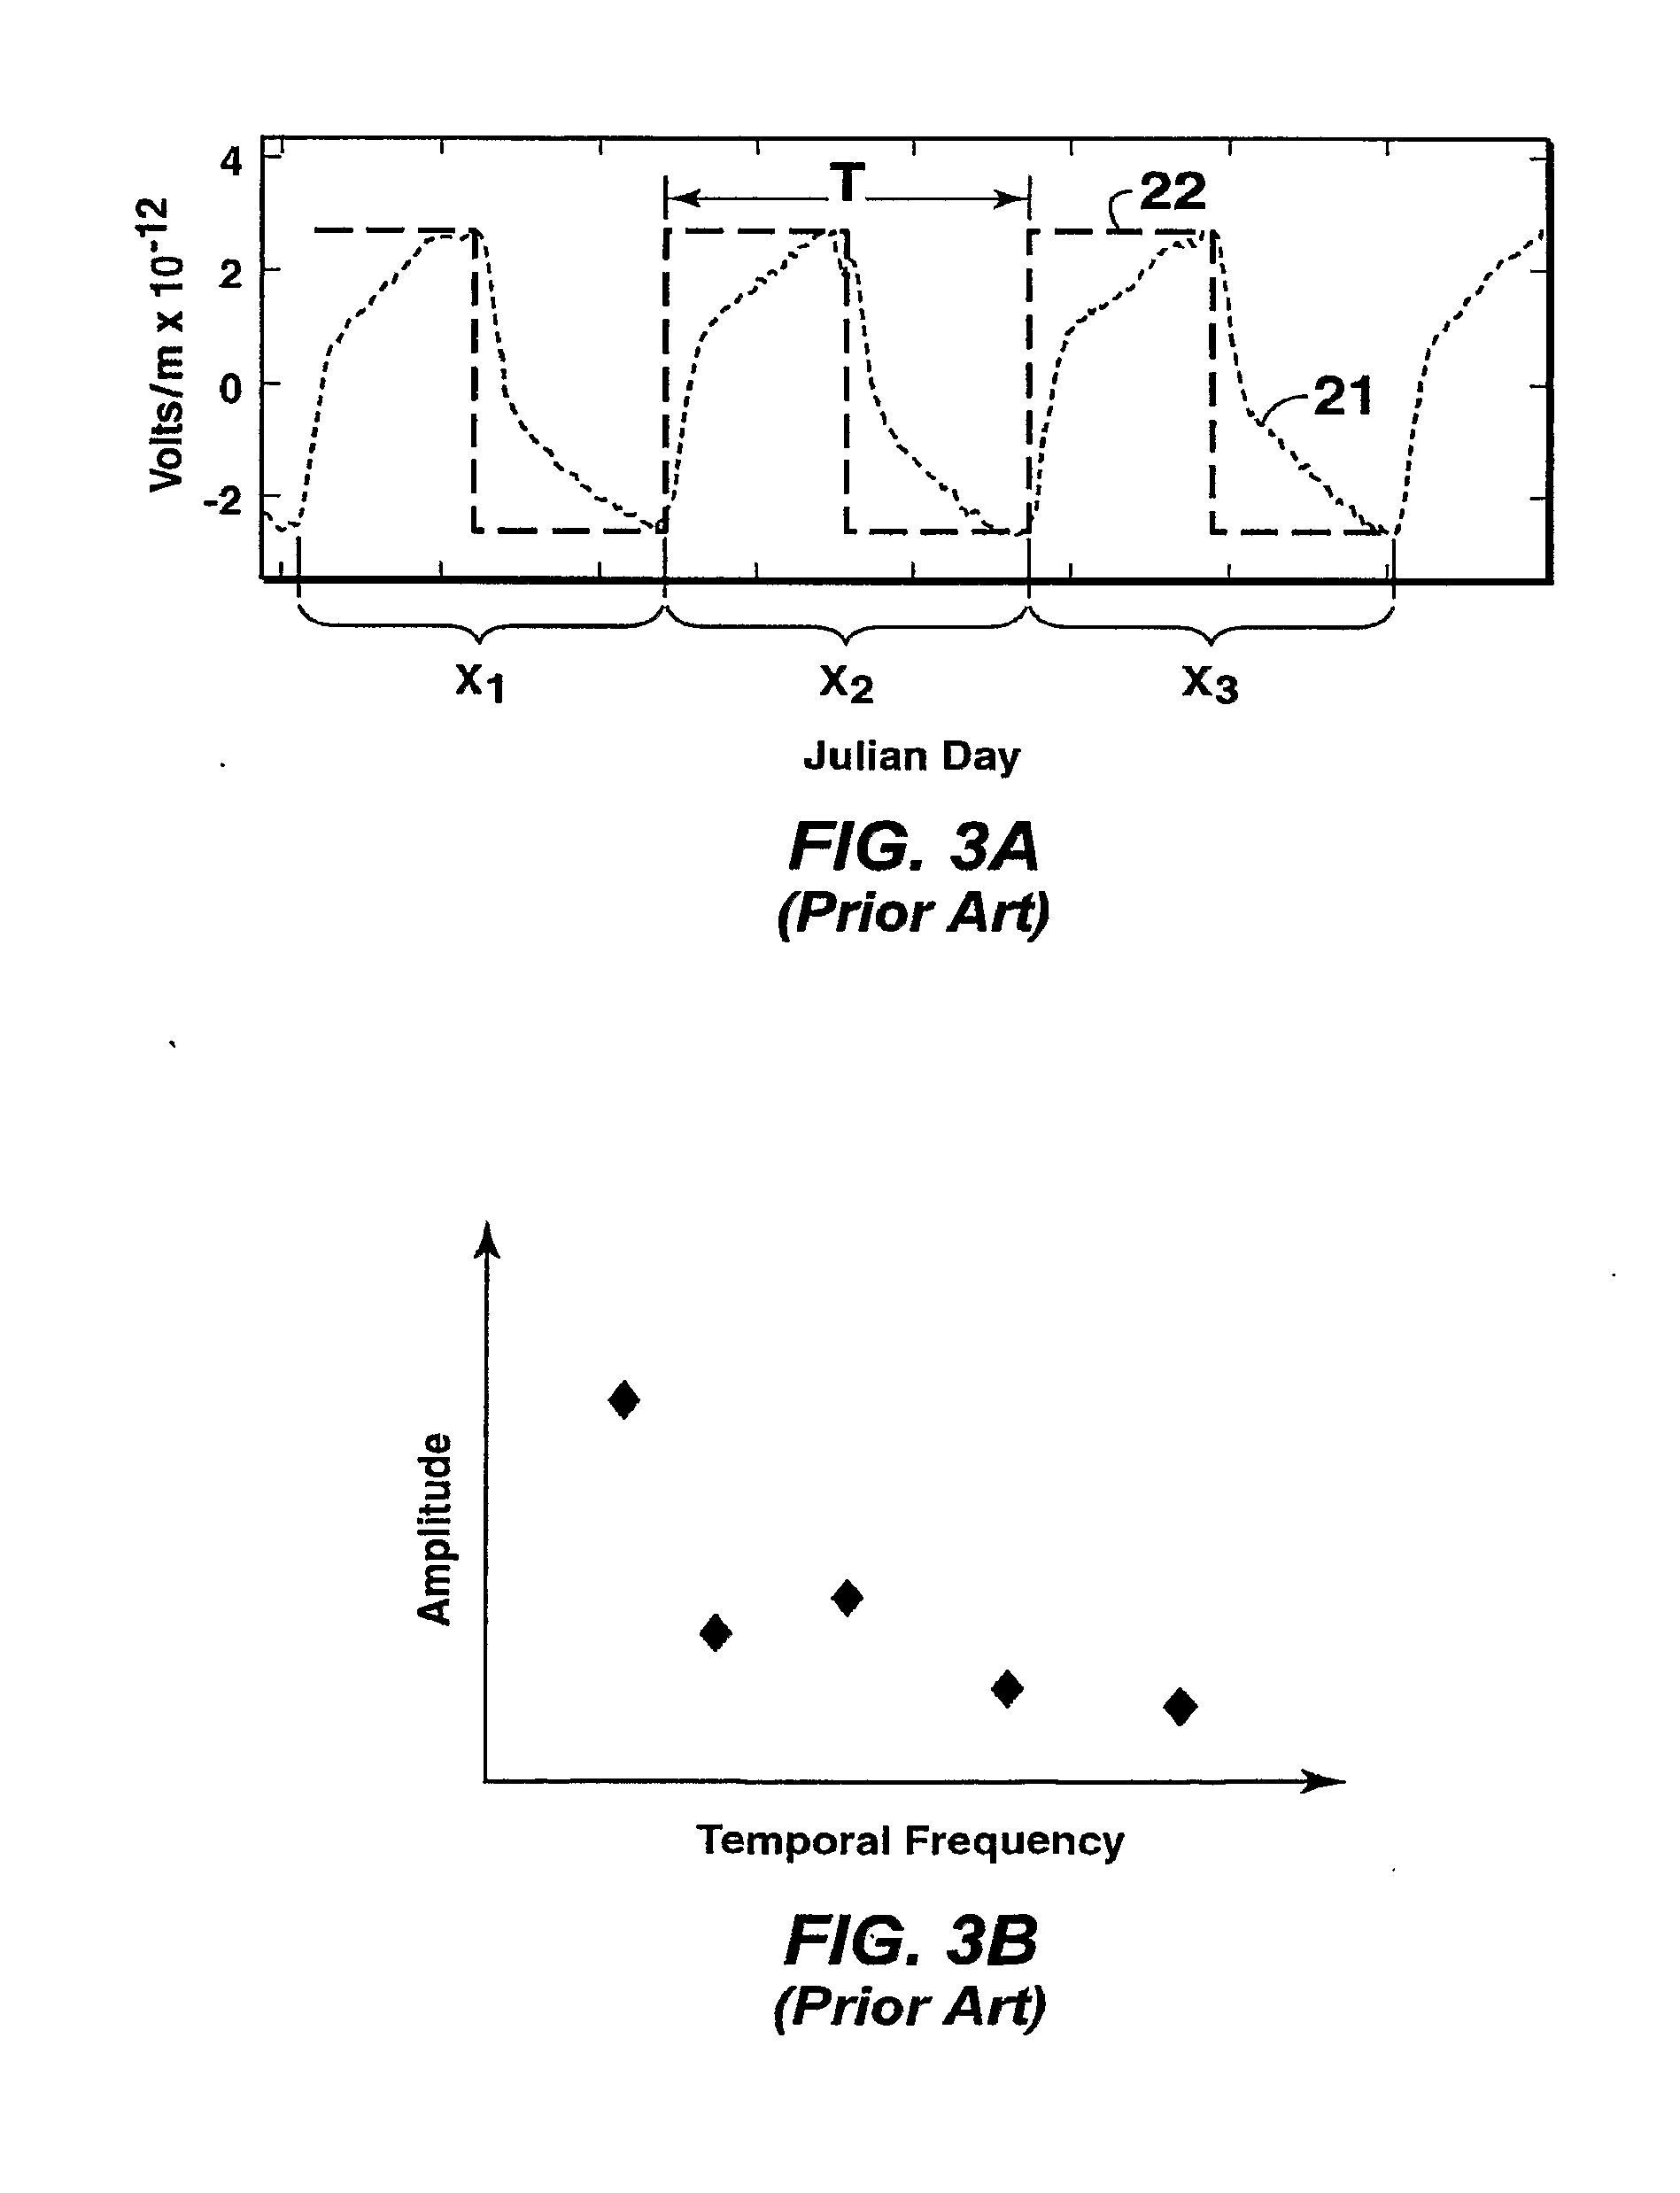 Method For Obtaining Resistivity From Controlled Source Electromagnetic Data